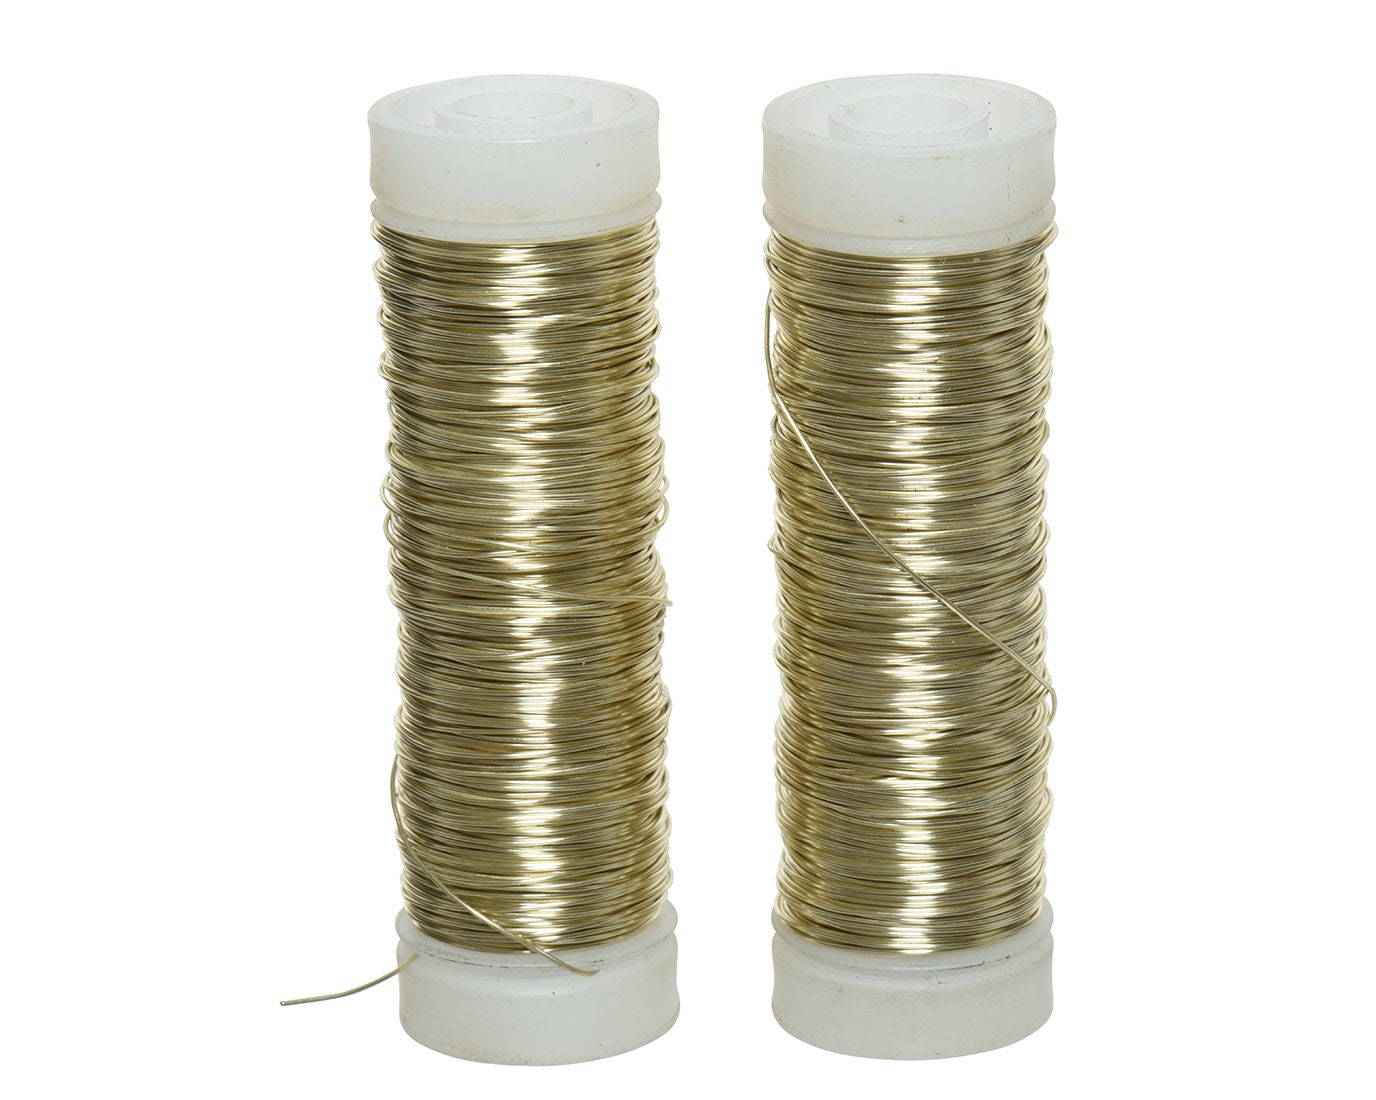 Approx. 10-Meter (32') Spool of 0.38mm 7-Strand Tiger Tail Nylon-Coated  Stainless Steel Beading Wire, Antique Gold